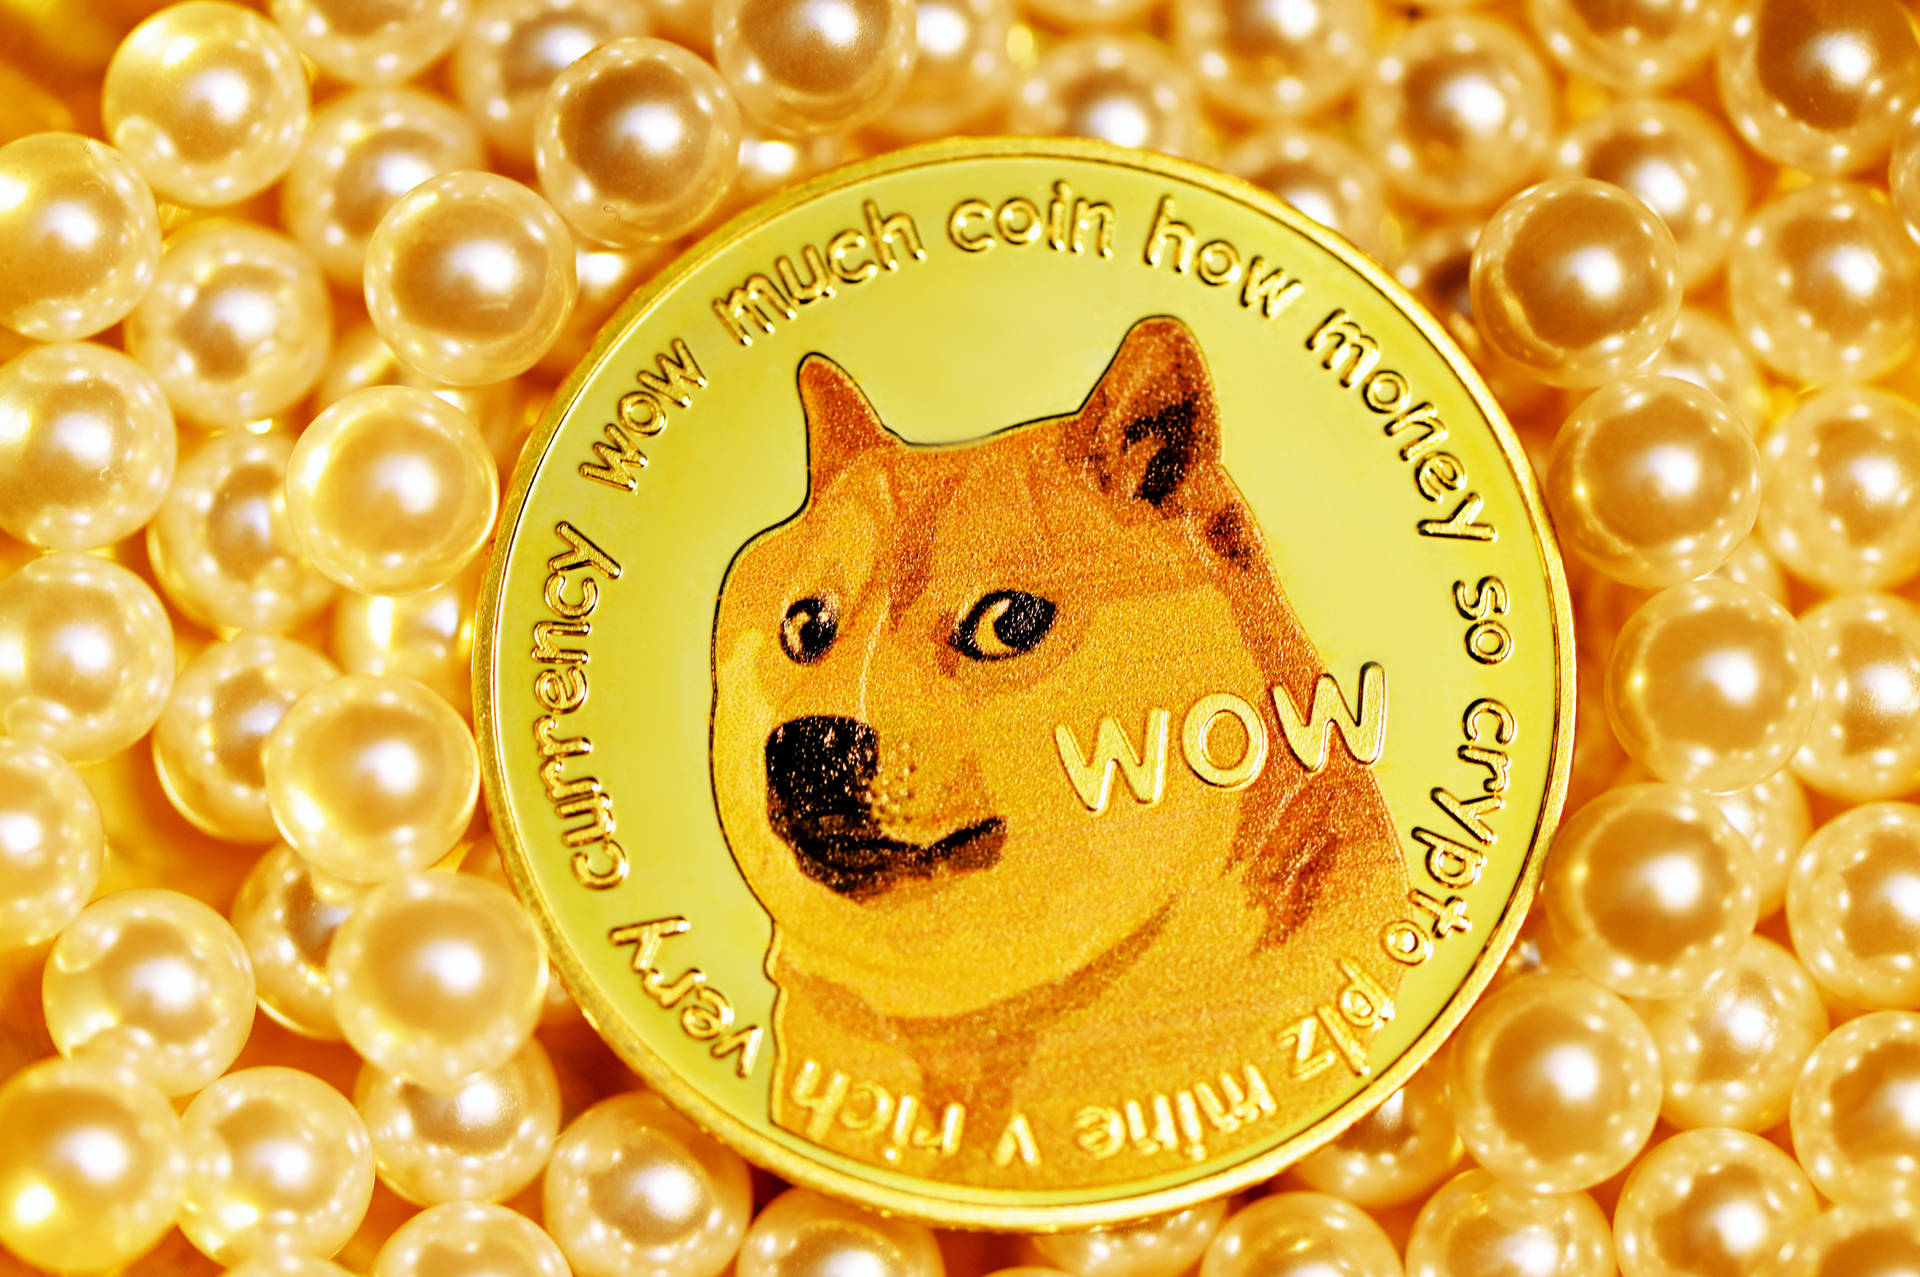 Dogecoin In Glowing Pearls Background